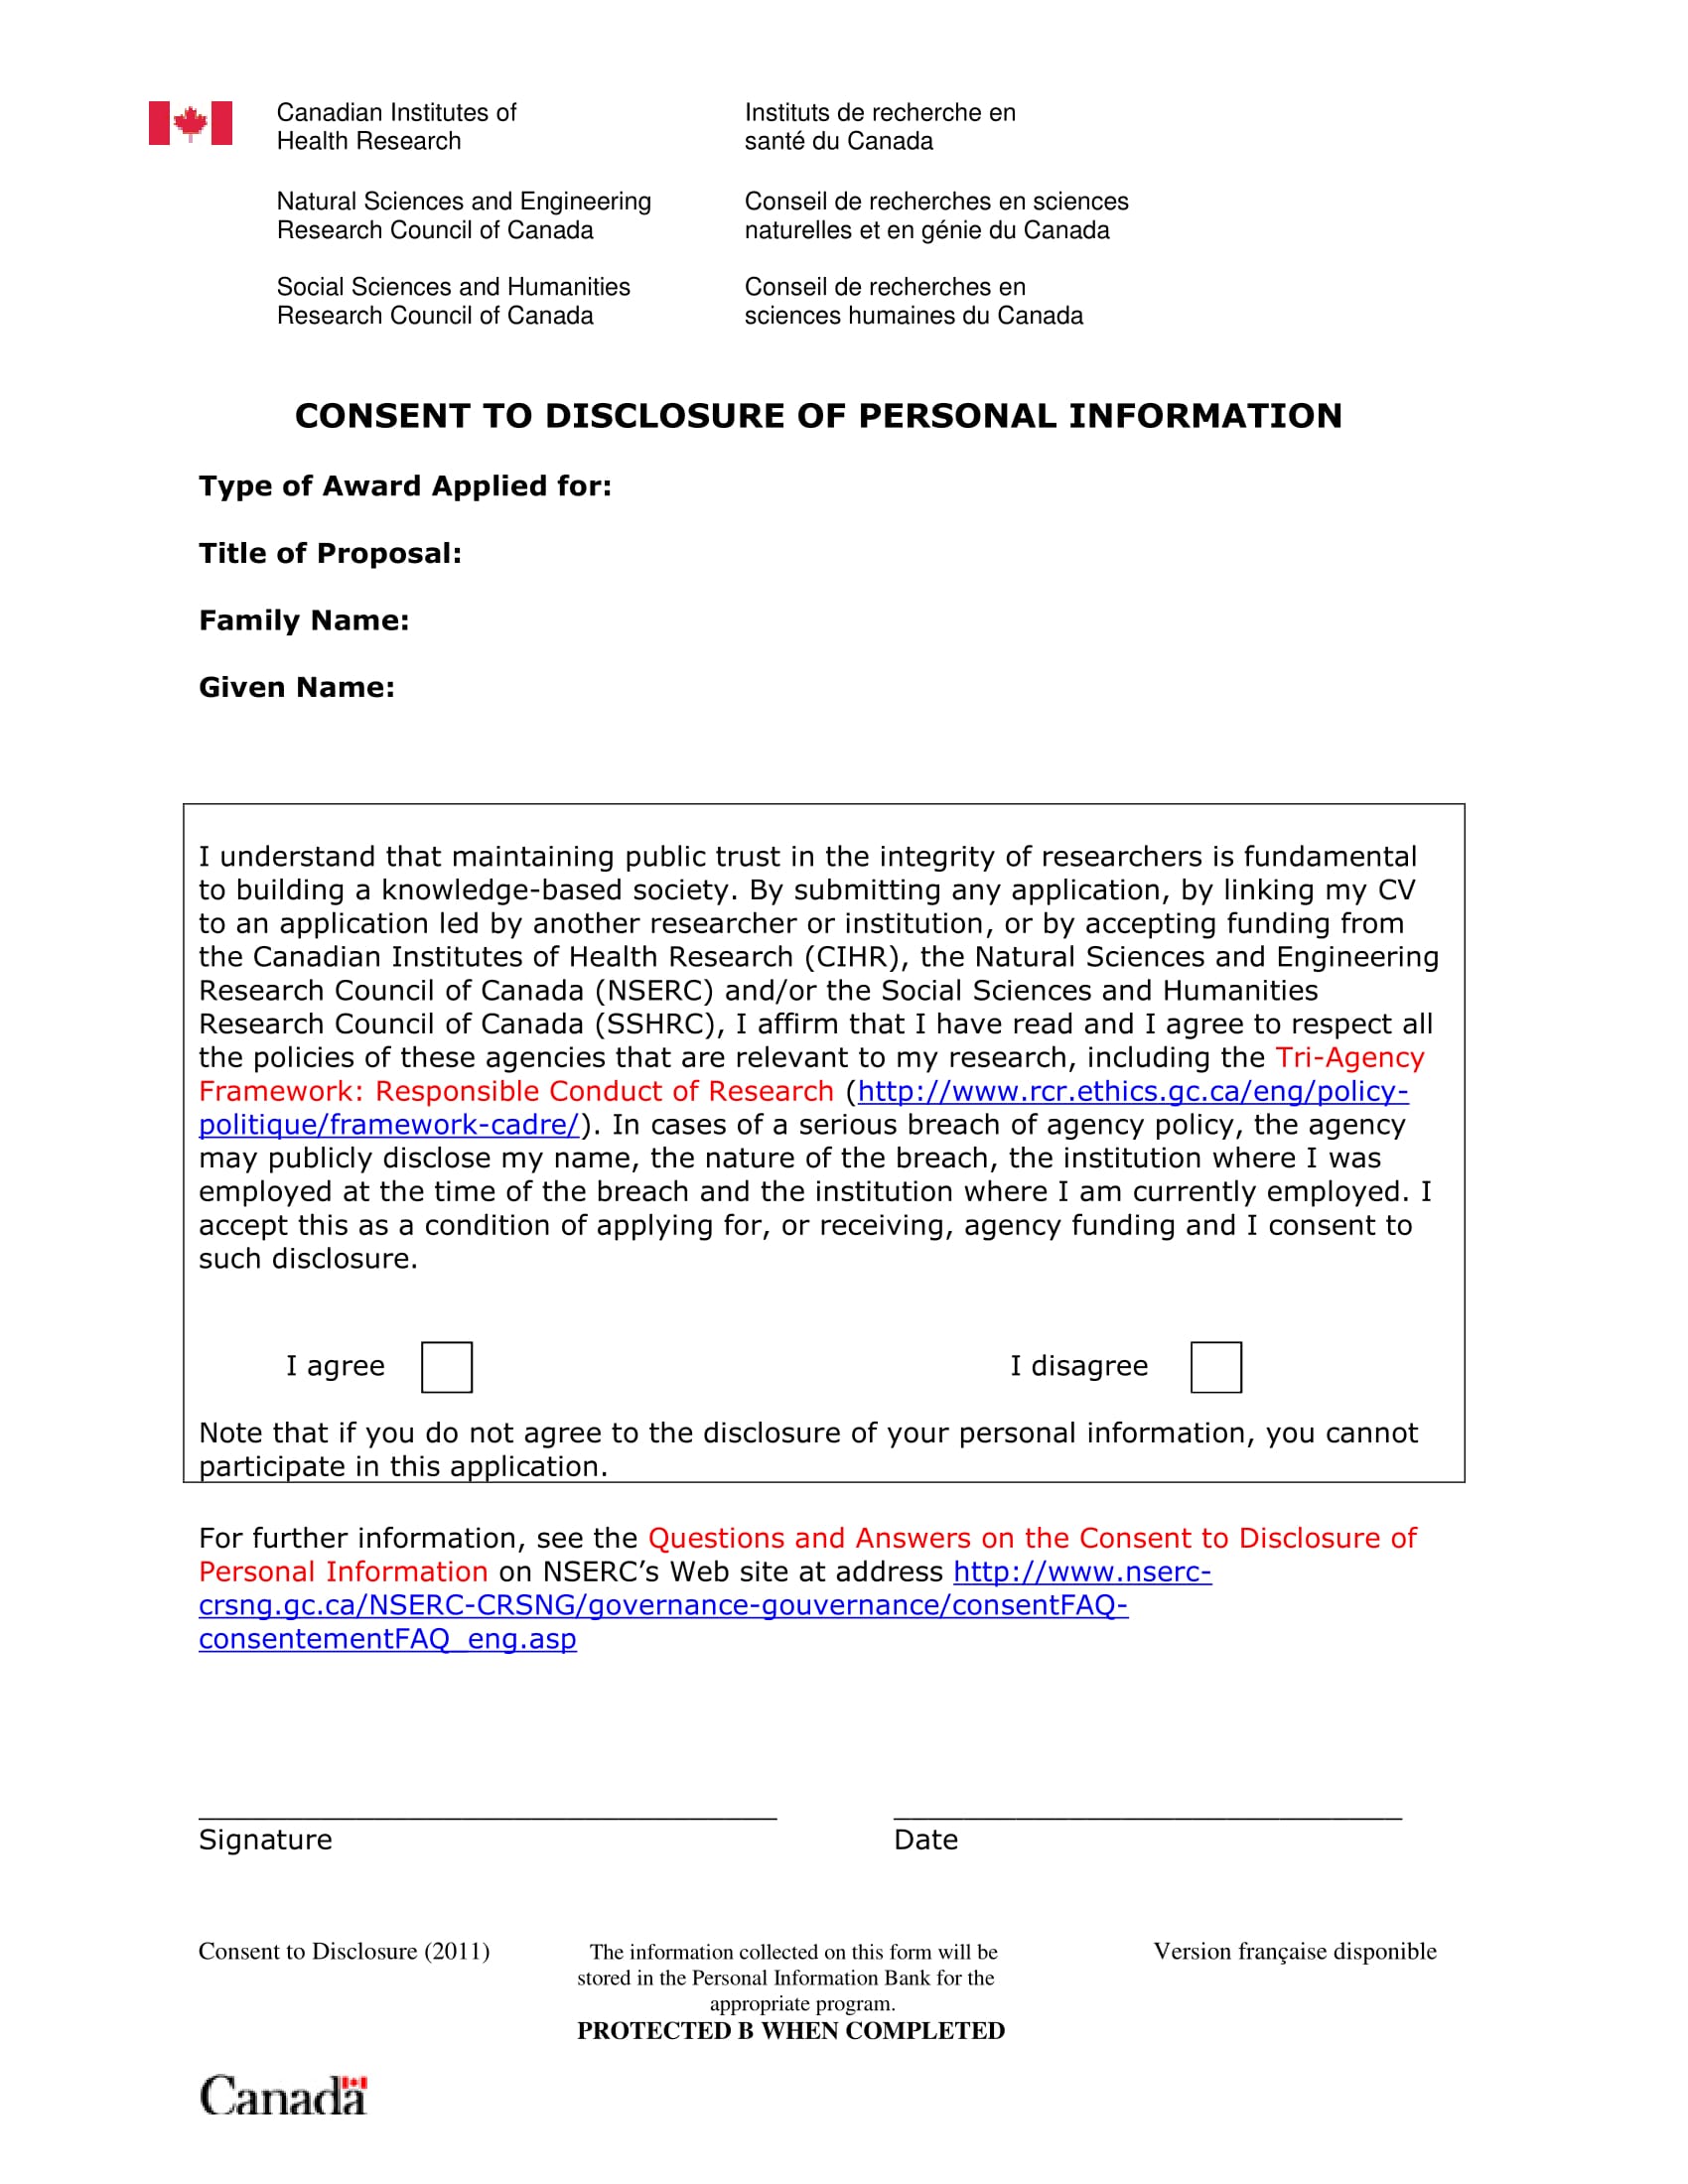 consent to disclose personal information form 1